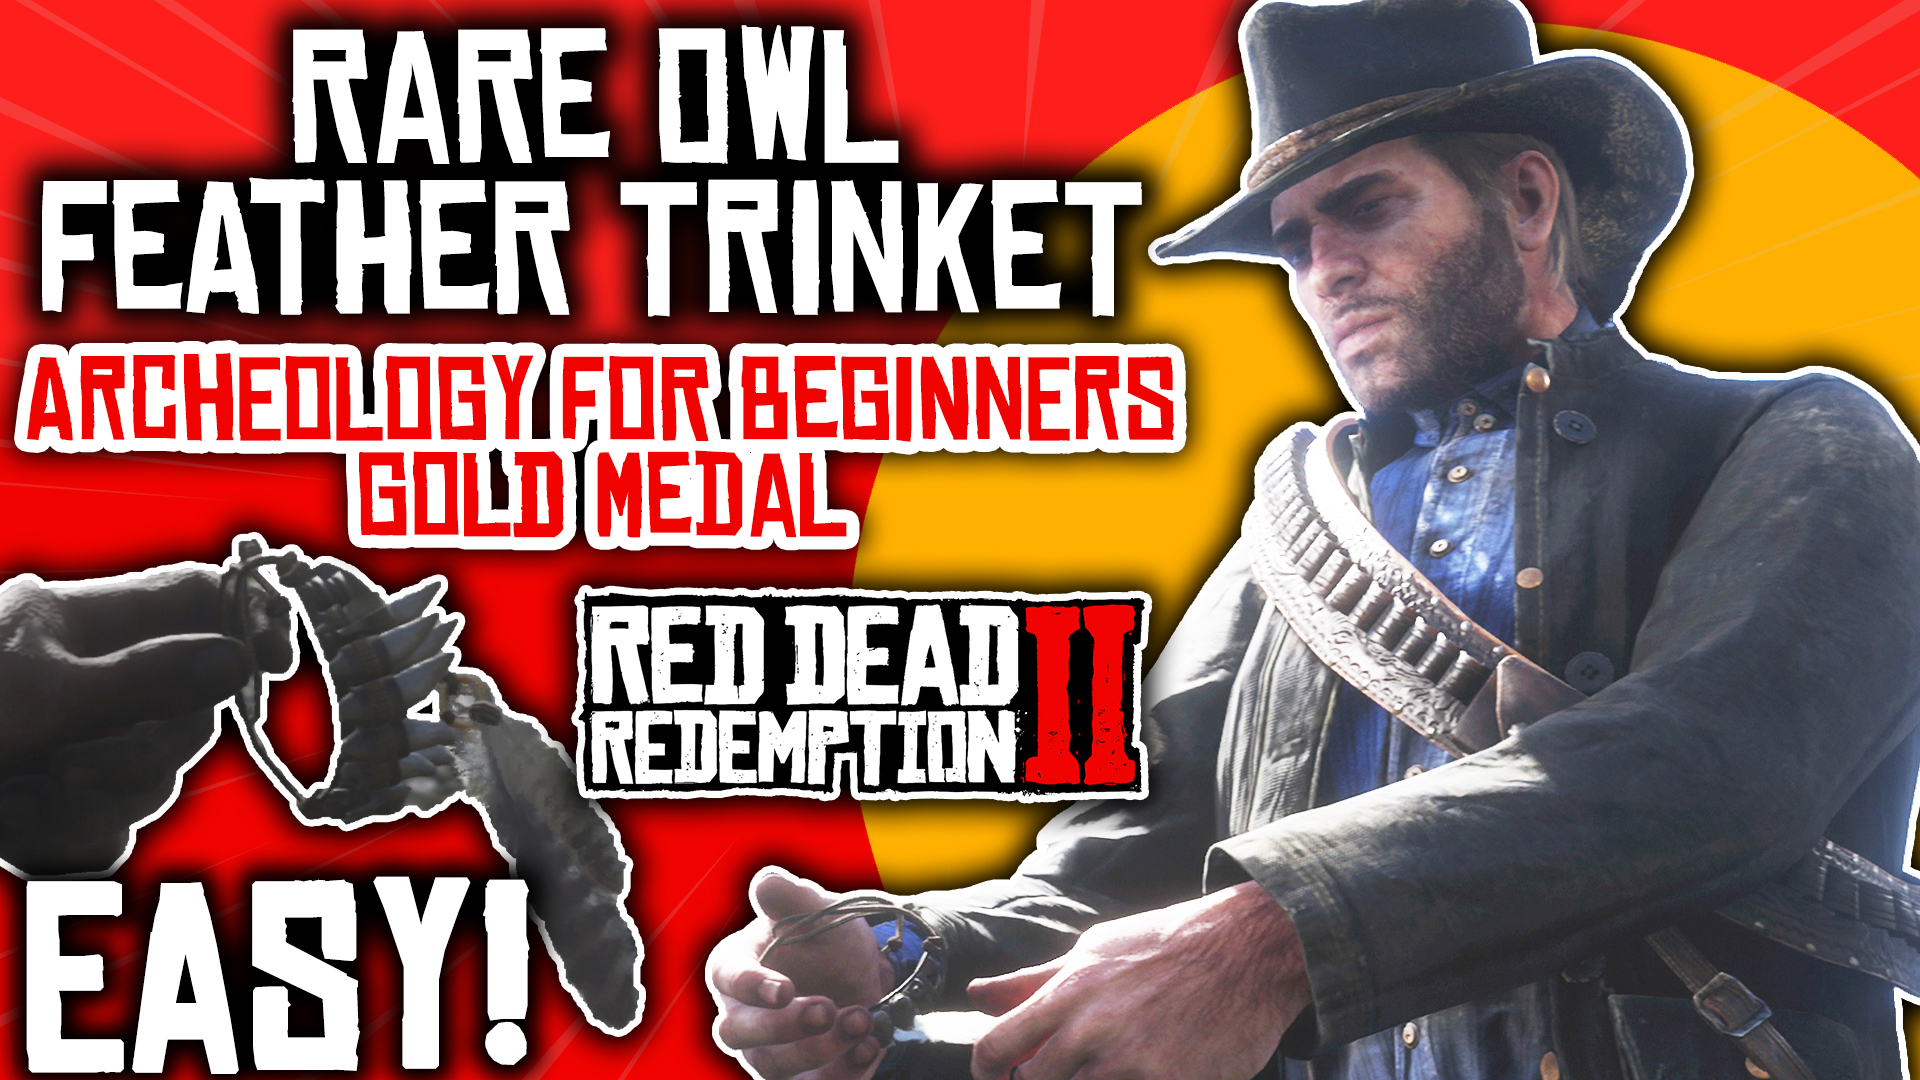 Rare Owl Feather Trinket in Red Dead Redemption 2 Archeology For Beginners EASY Lord Kayoss